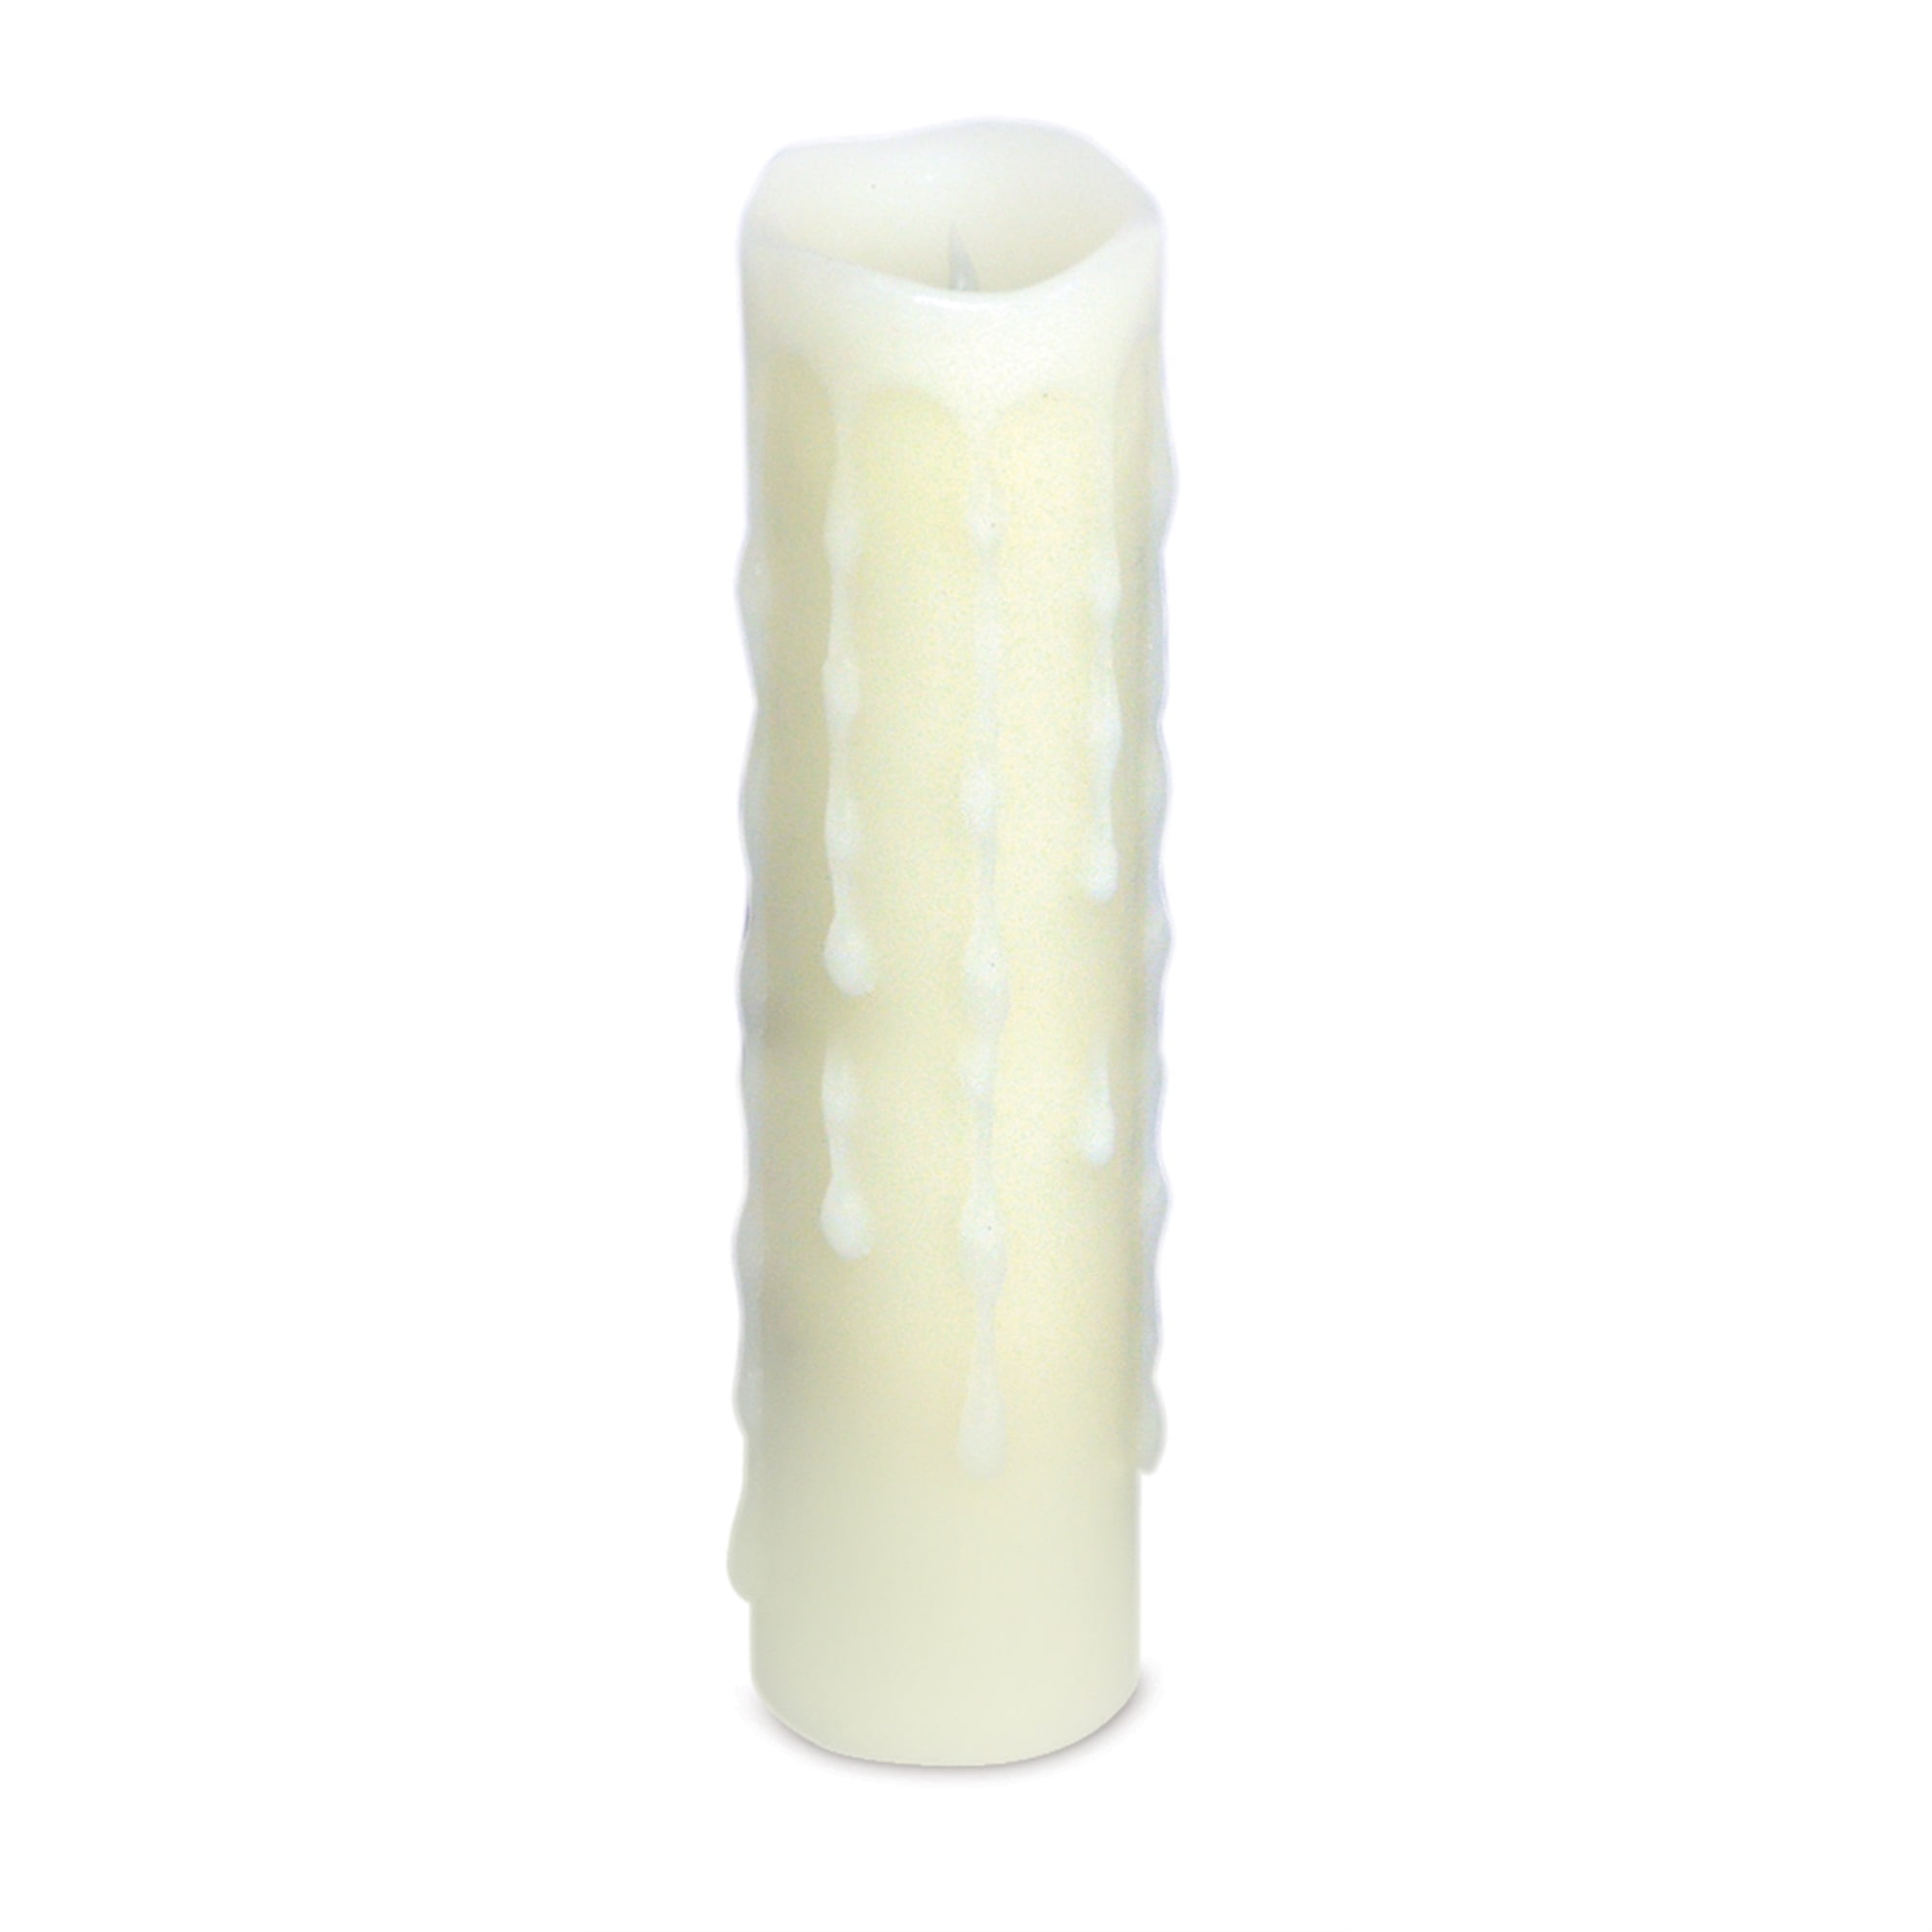 LED Wax Dripping Pillar Candle (Set of 4 ) 1.75"Dx8"H Wax/Plastic - 2 AA Batteries Not Incld